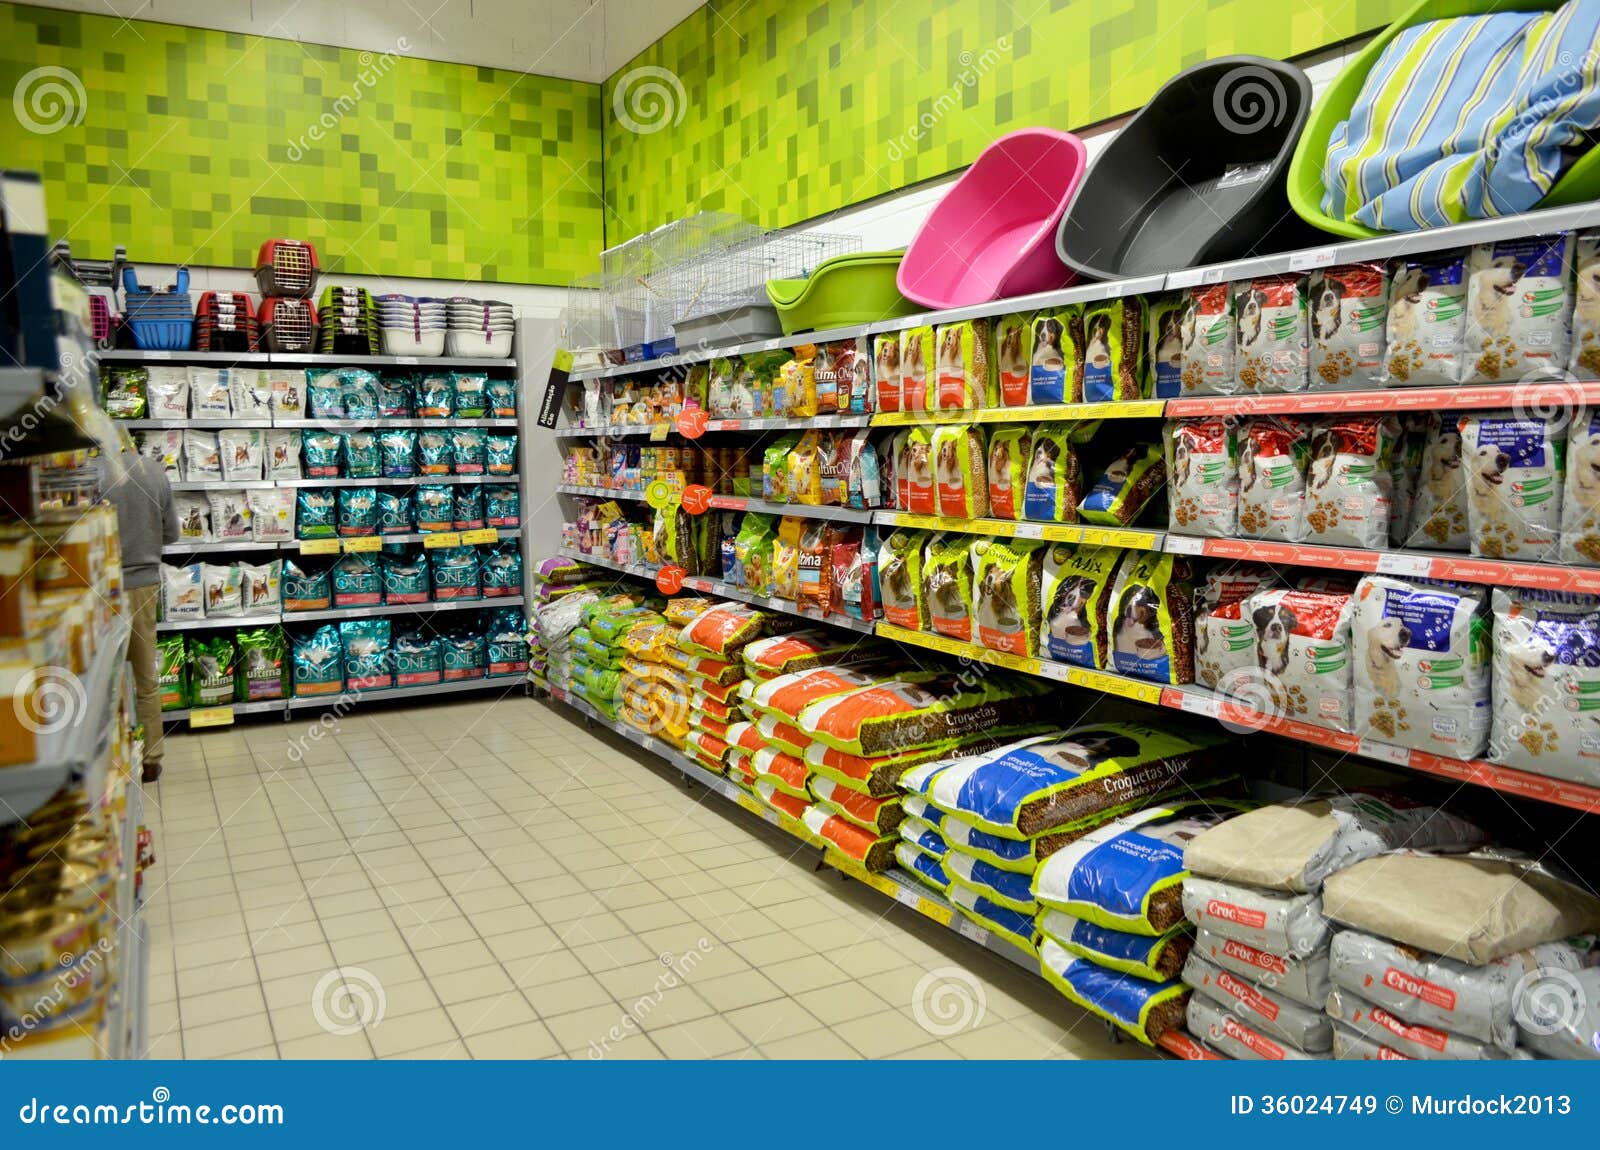 Pet Products Editorial Stock Image - Image: 36024749